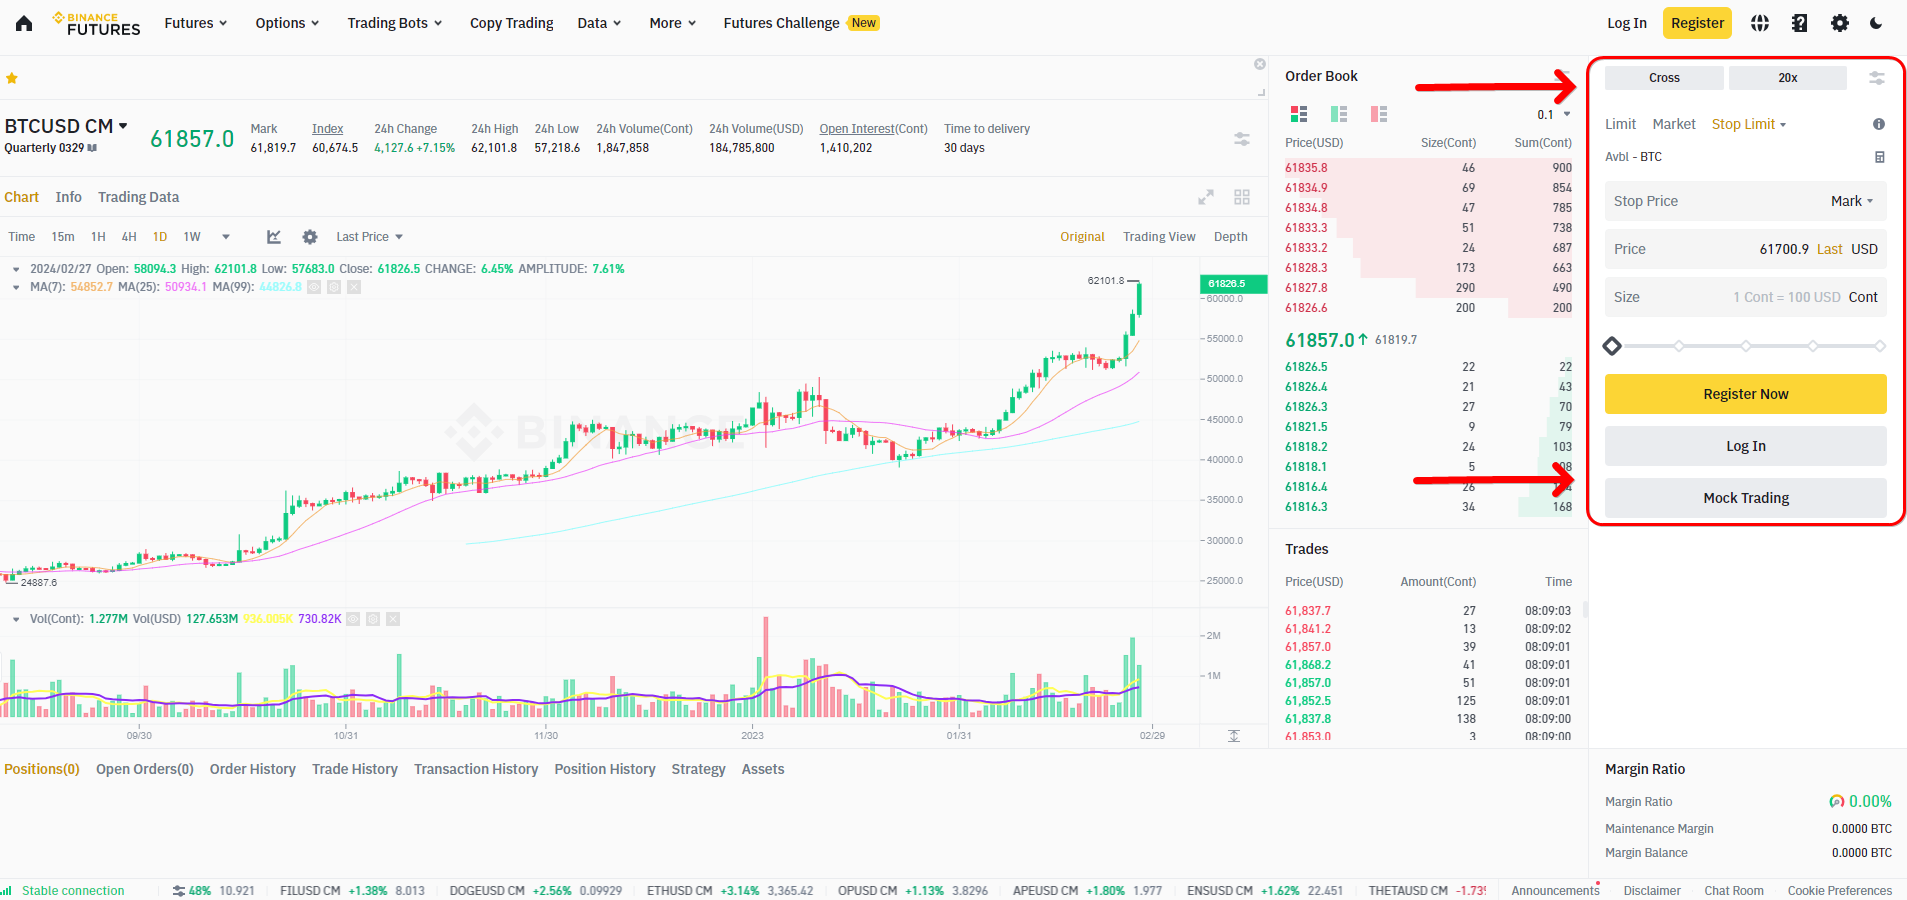 How to scalp Binance futures: The order submission block for COIN-M future